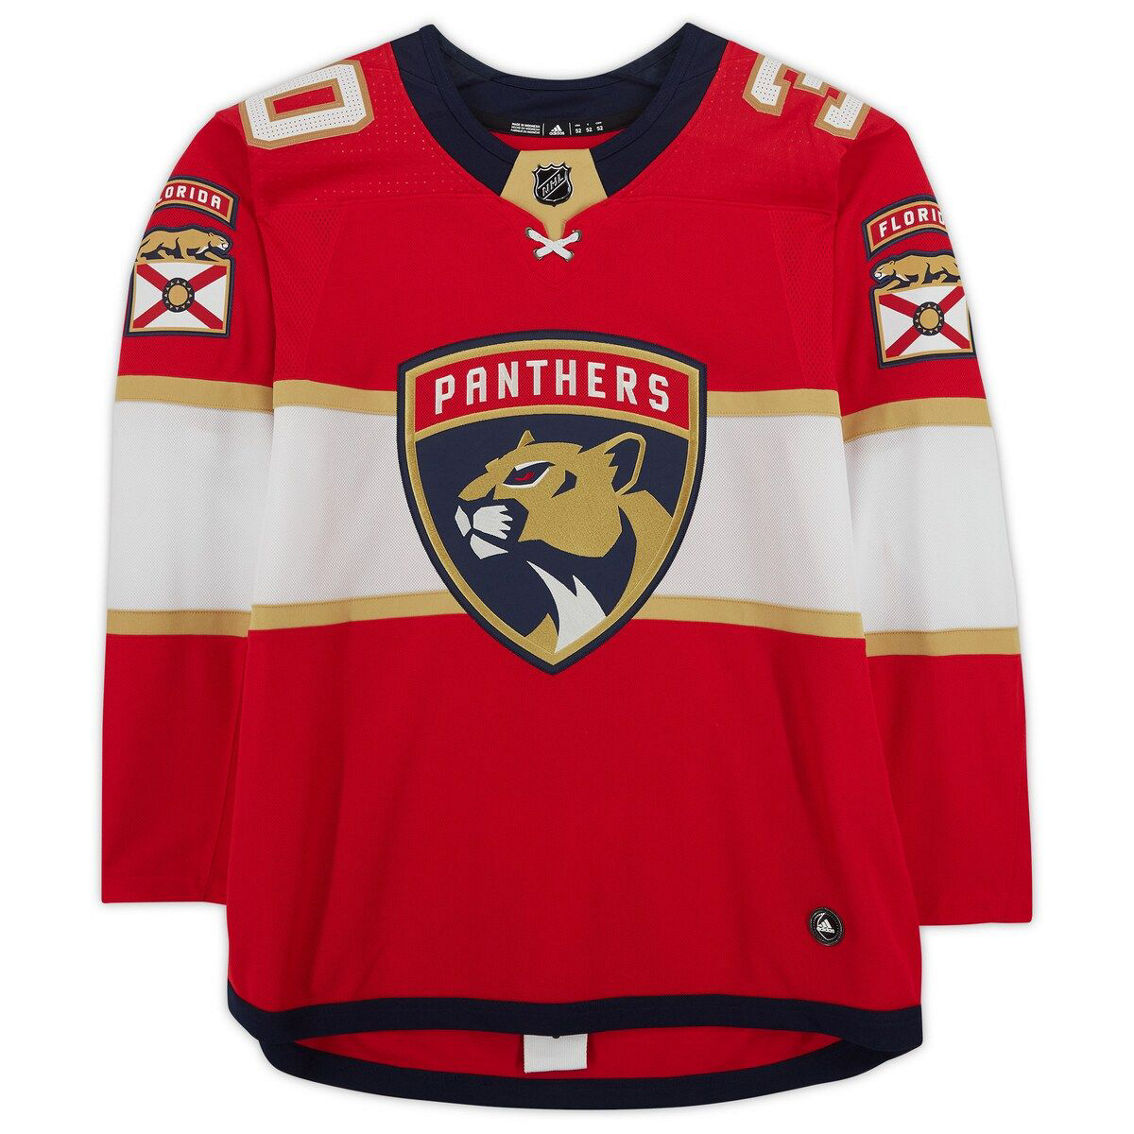 Fanatics Authentic Spencer Knight Florida Panthers Autographed Red Adidas Authentic Jersey with Multiple Inscriptions - Image 4 of 4